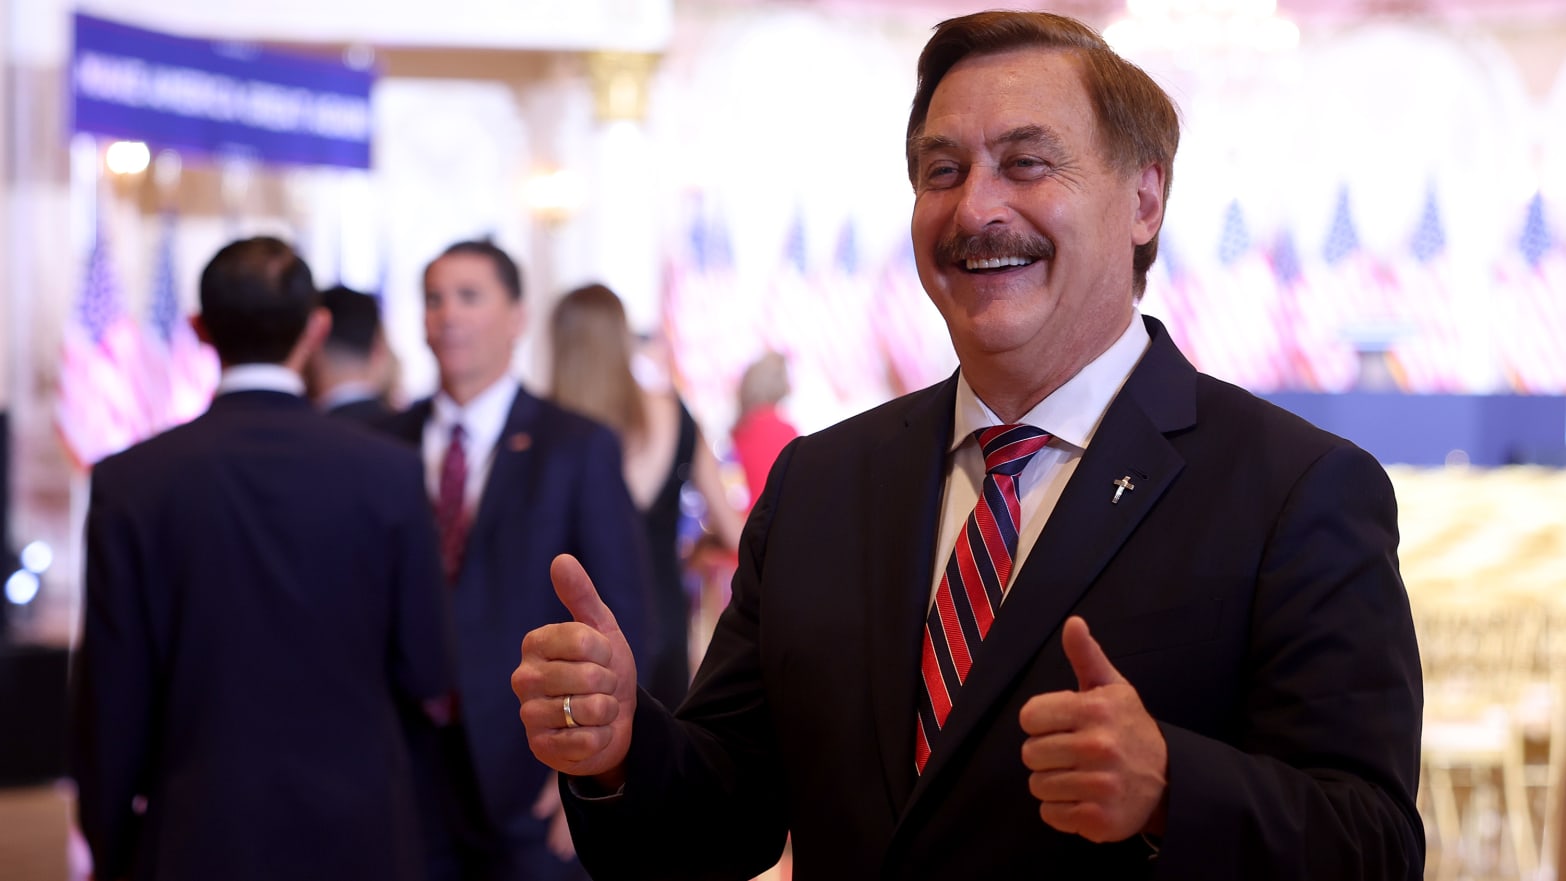 Mike Lindell speaks to the press before a Donald Trump speech in Florida.